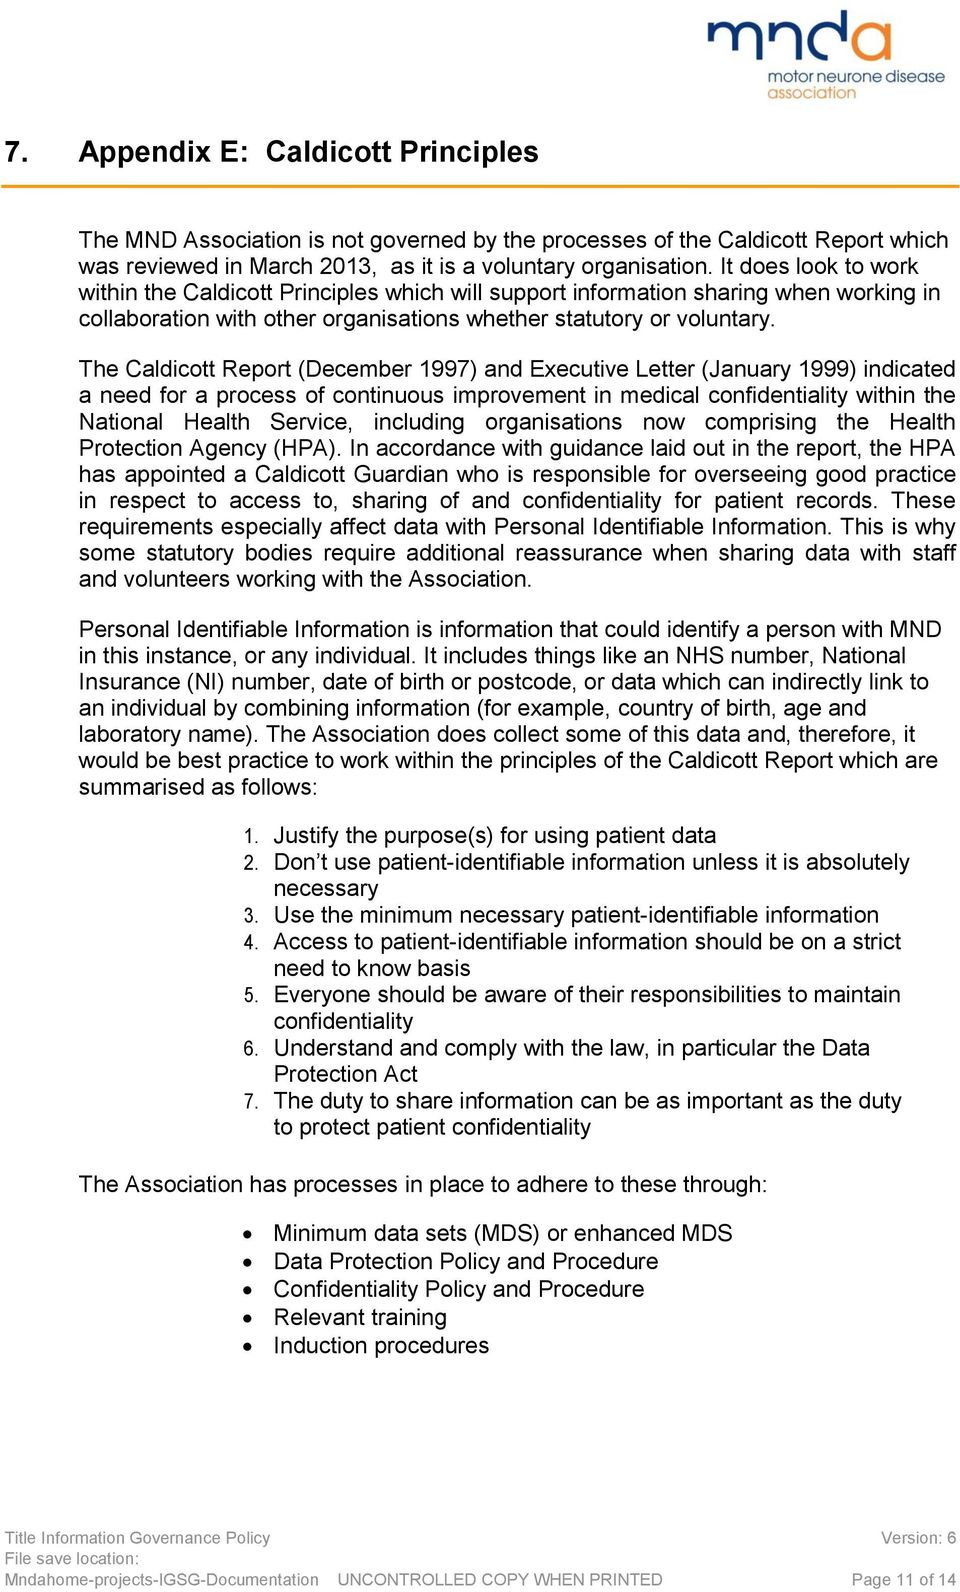 The Caldicott Report (December 1997) and Executive Letter (January 1999) indicated a need for a process of continuous improvement in medical confidentiality within the National Health Service,